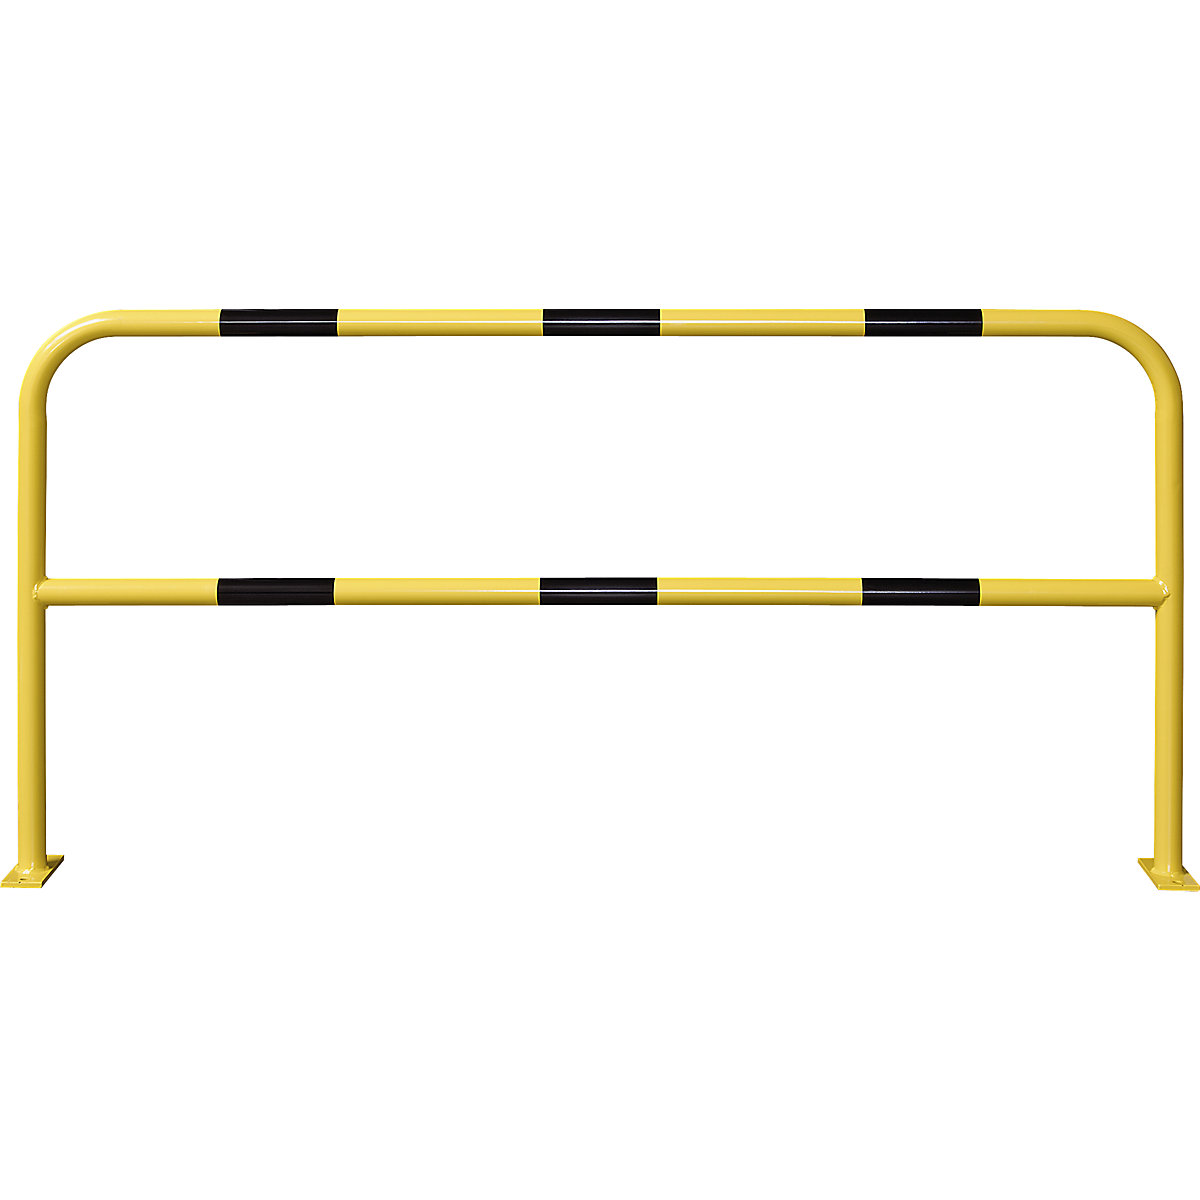 Crash protection bar, round tubing 48/2 mm, for bolting in place, width 2000 mm, zinc plated/coated-4